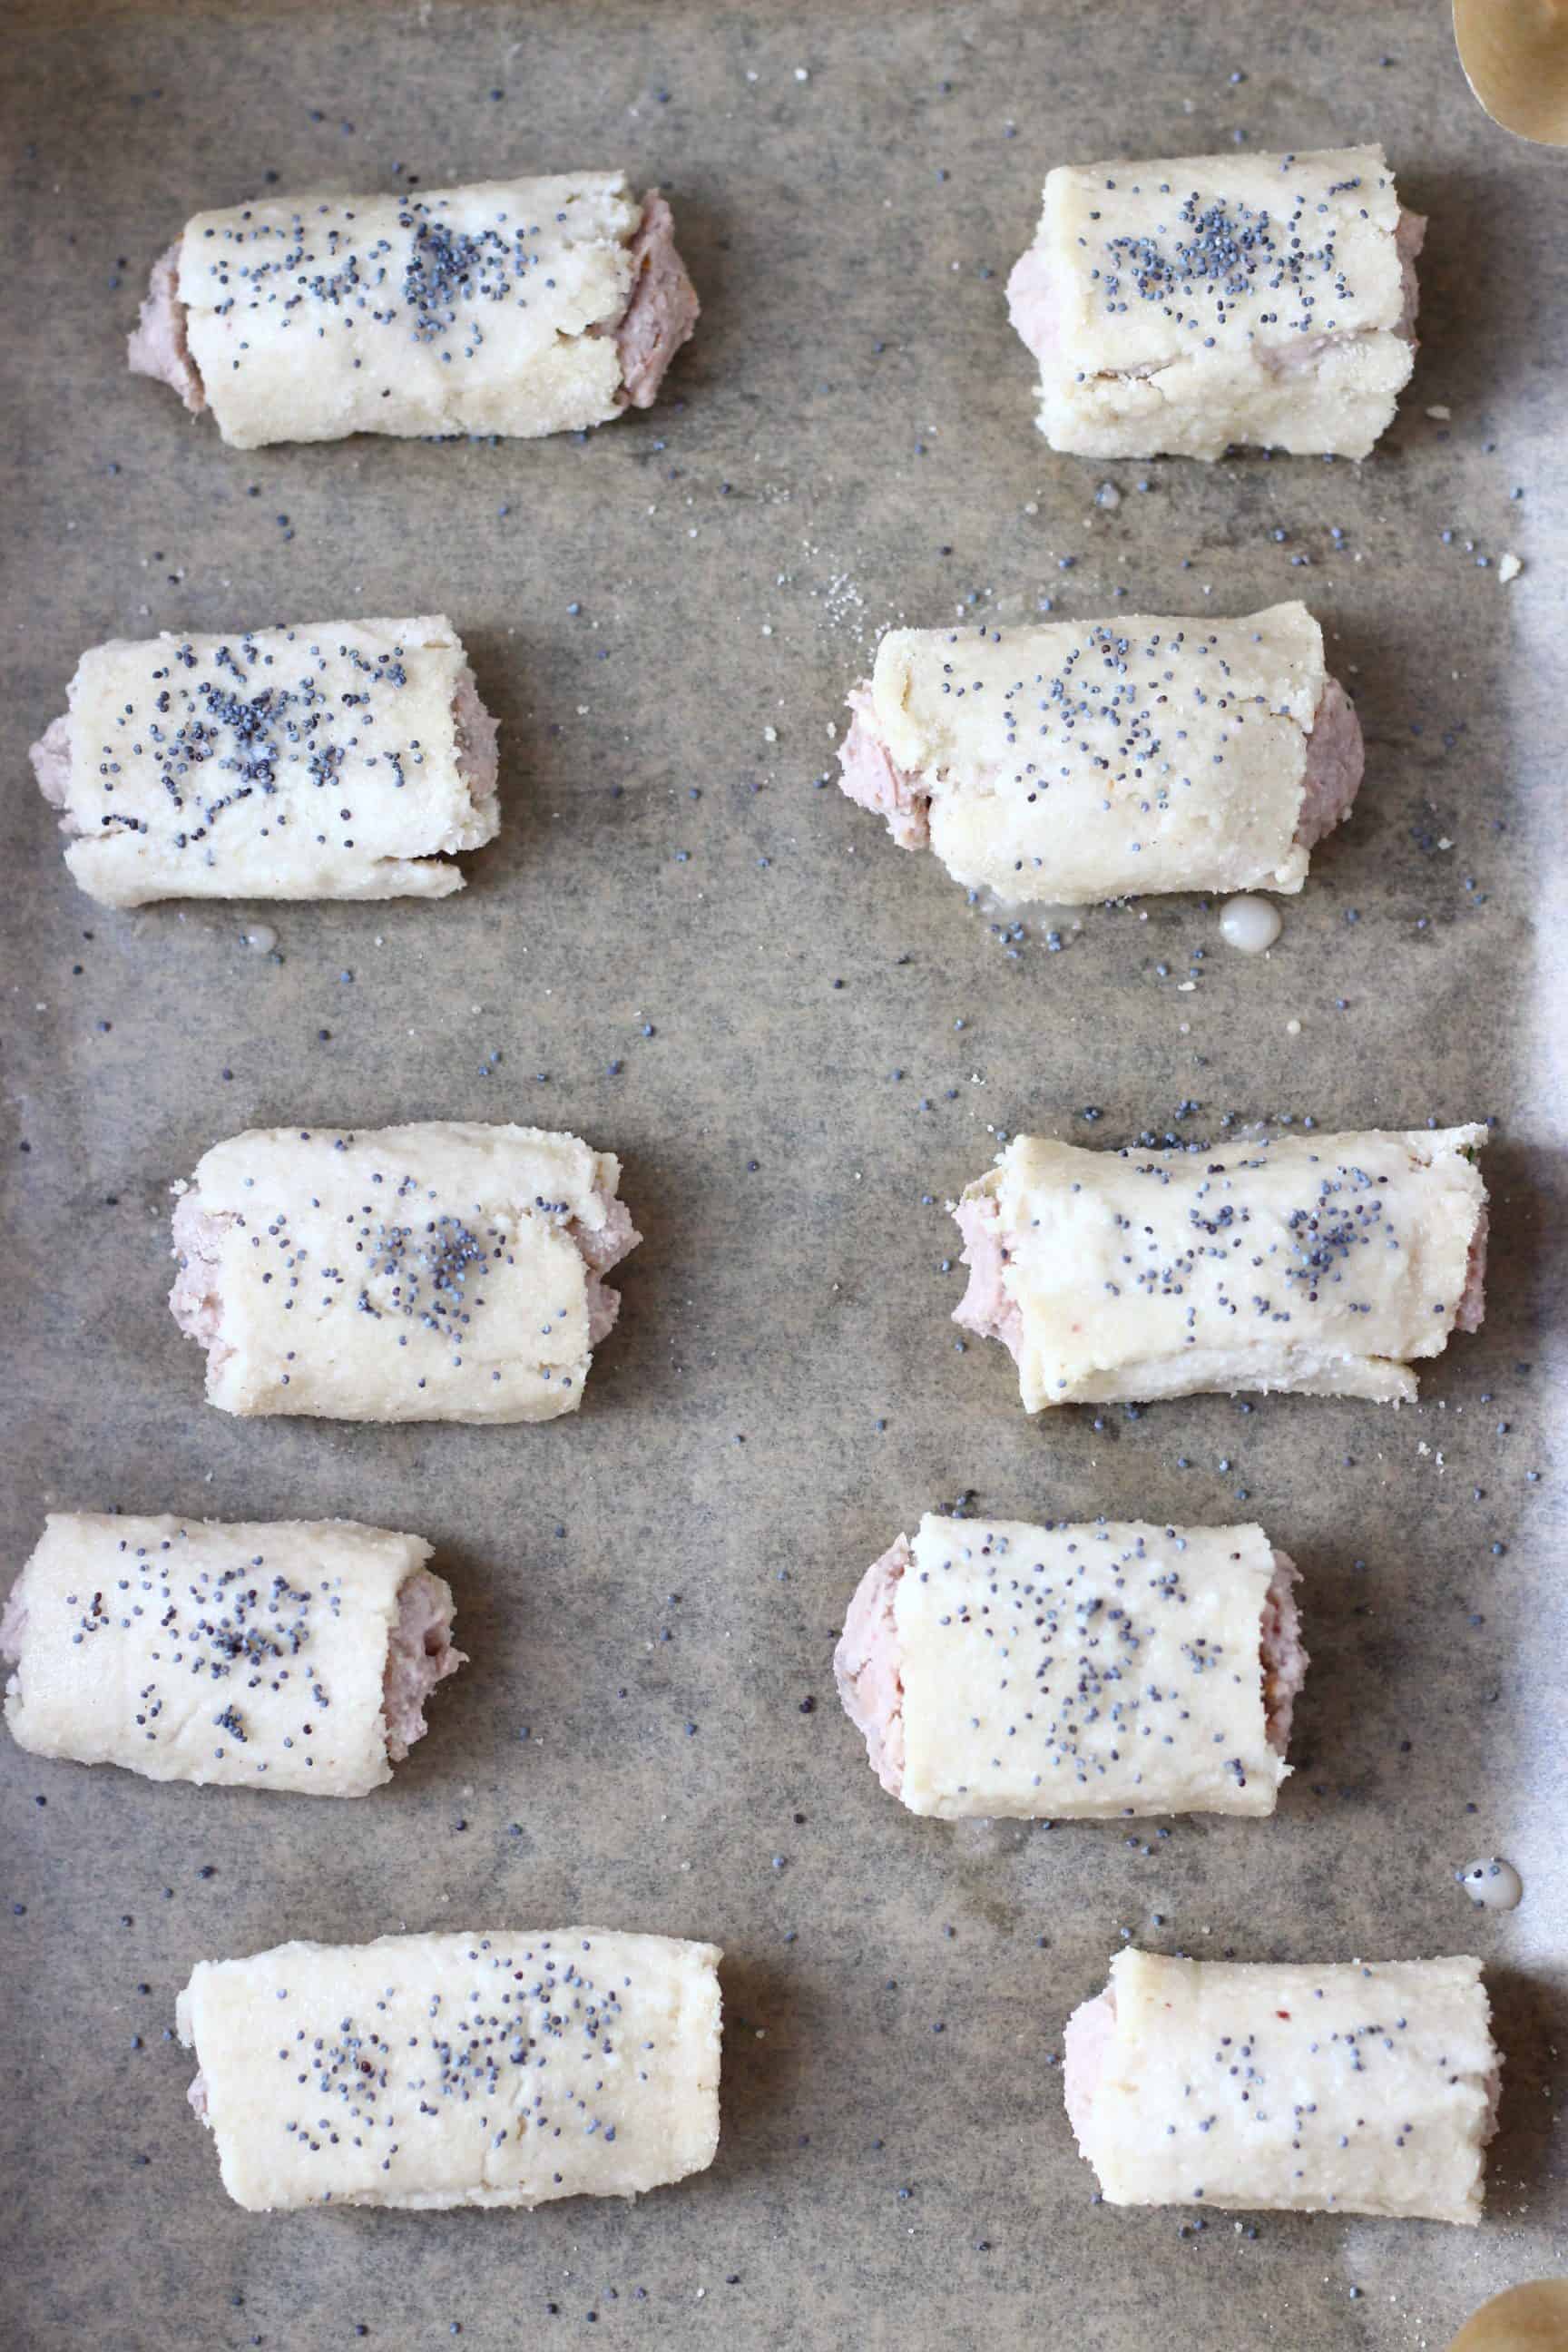 Ten uncooked vegan sausage rolls sprinkled with poppy seeds on a baking tray